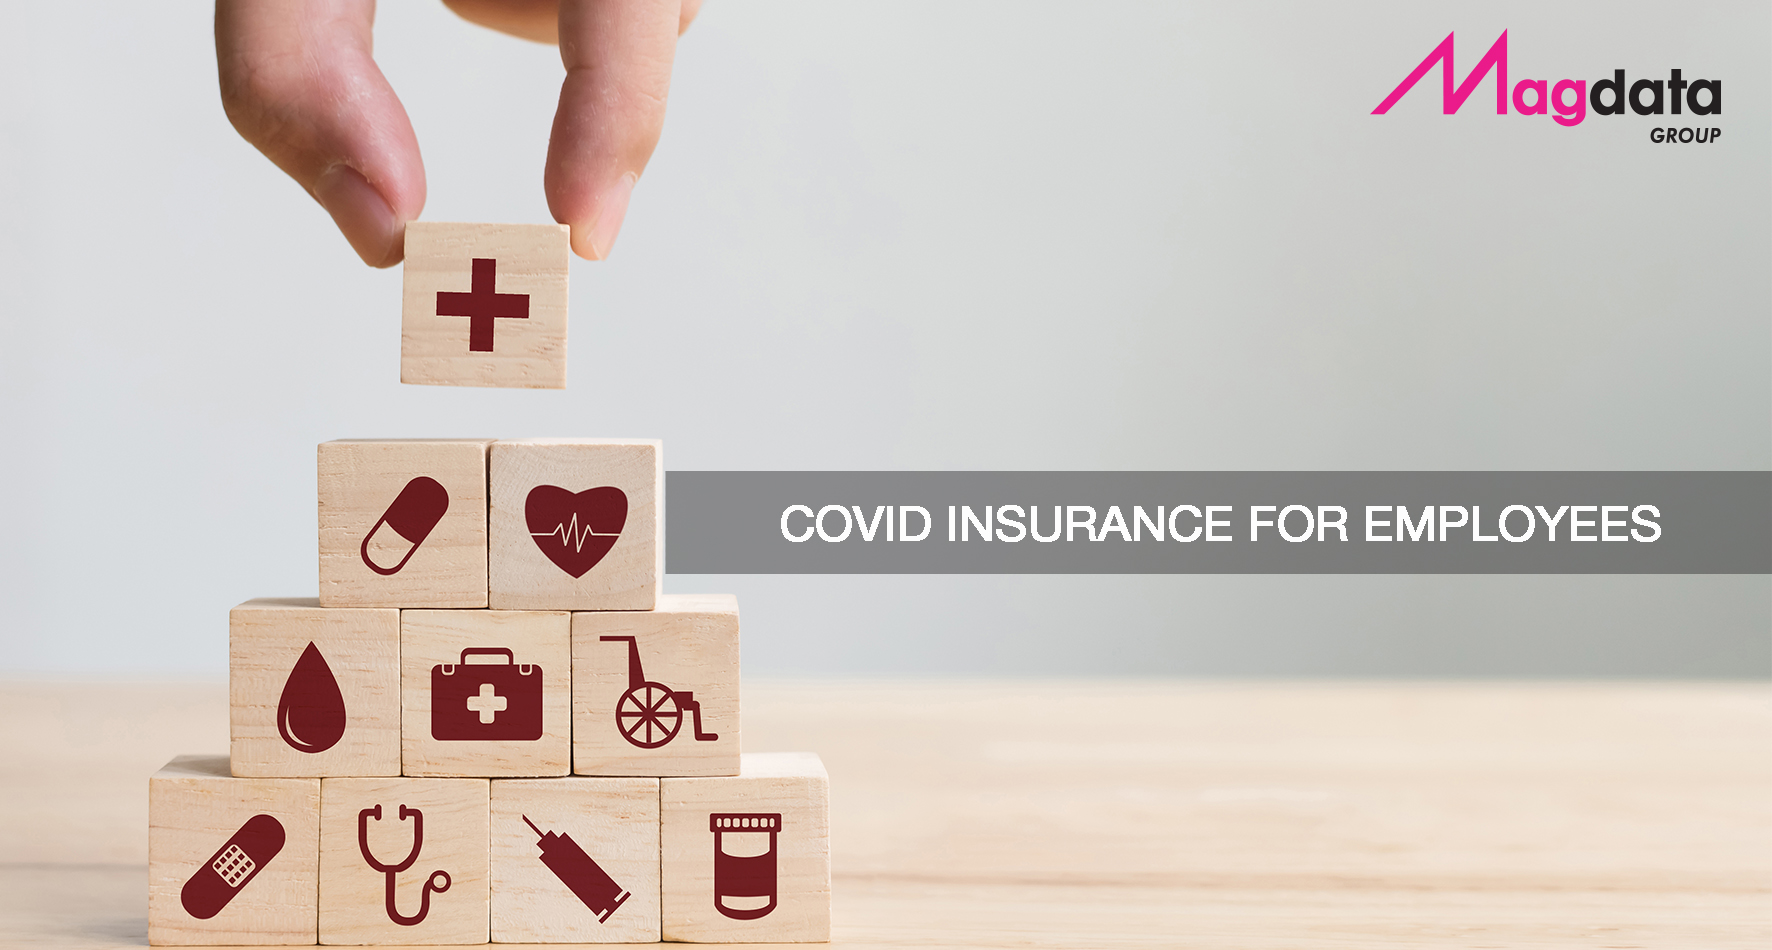 Covid Insurance for employees